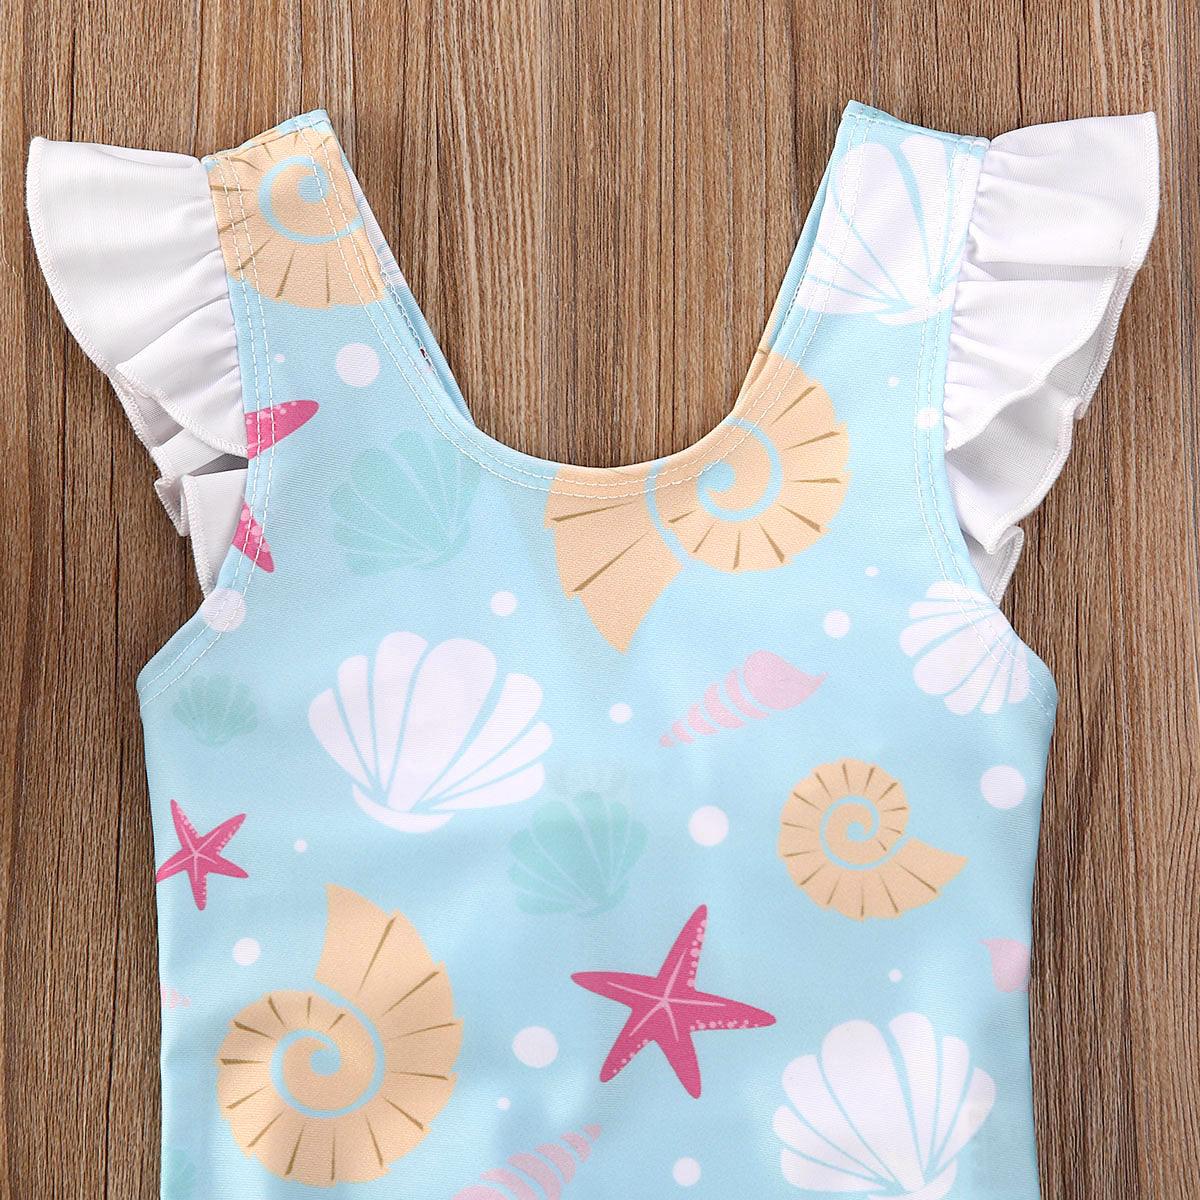 Toddler Sea Shells Swimsuit With Bow - Shop Baby Boutiques 